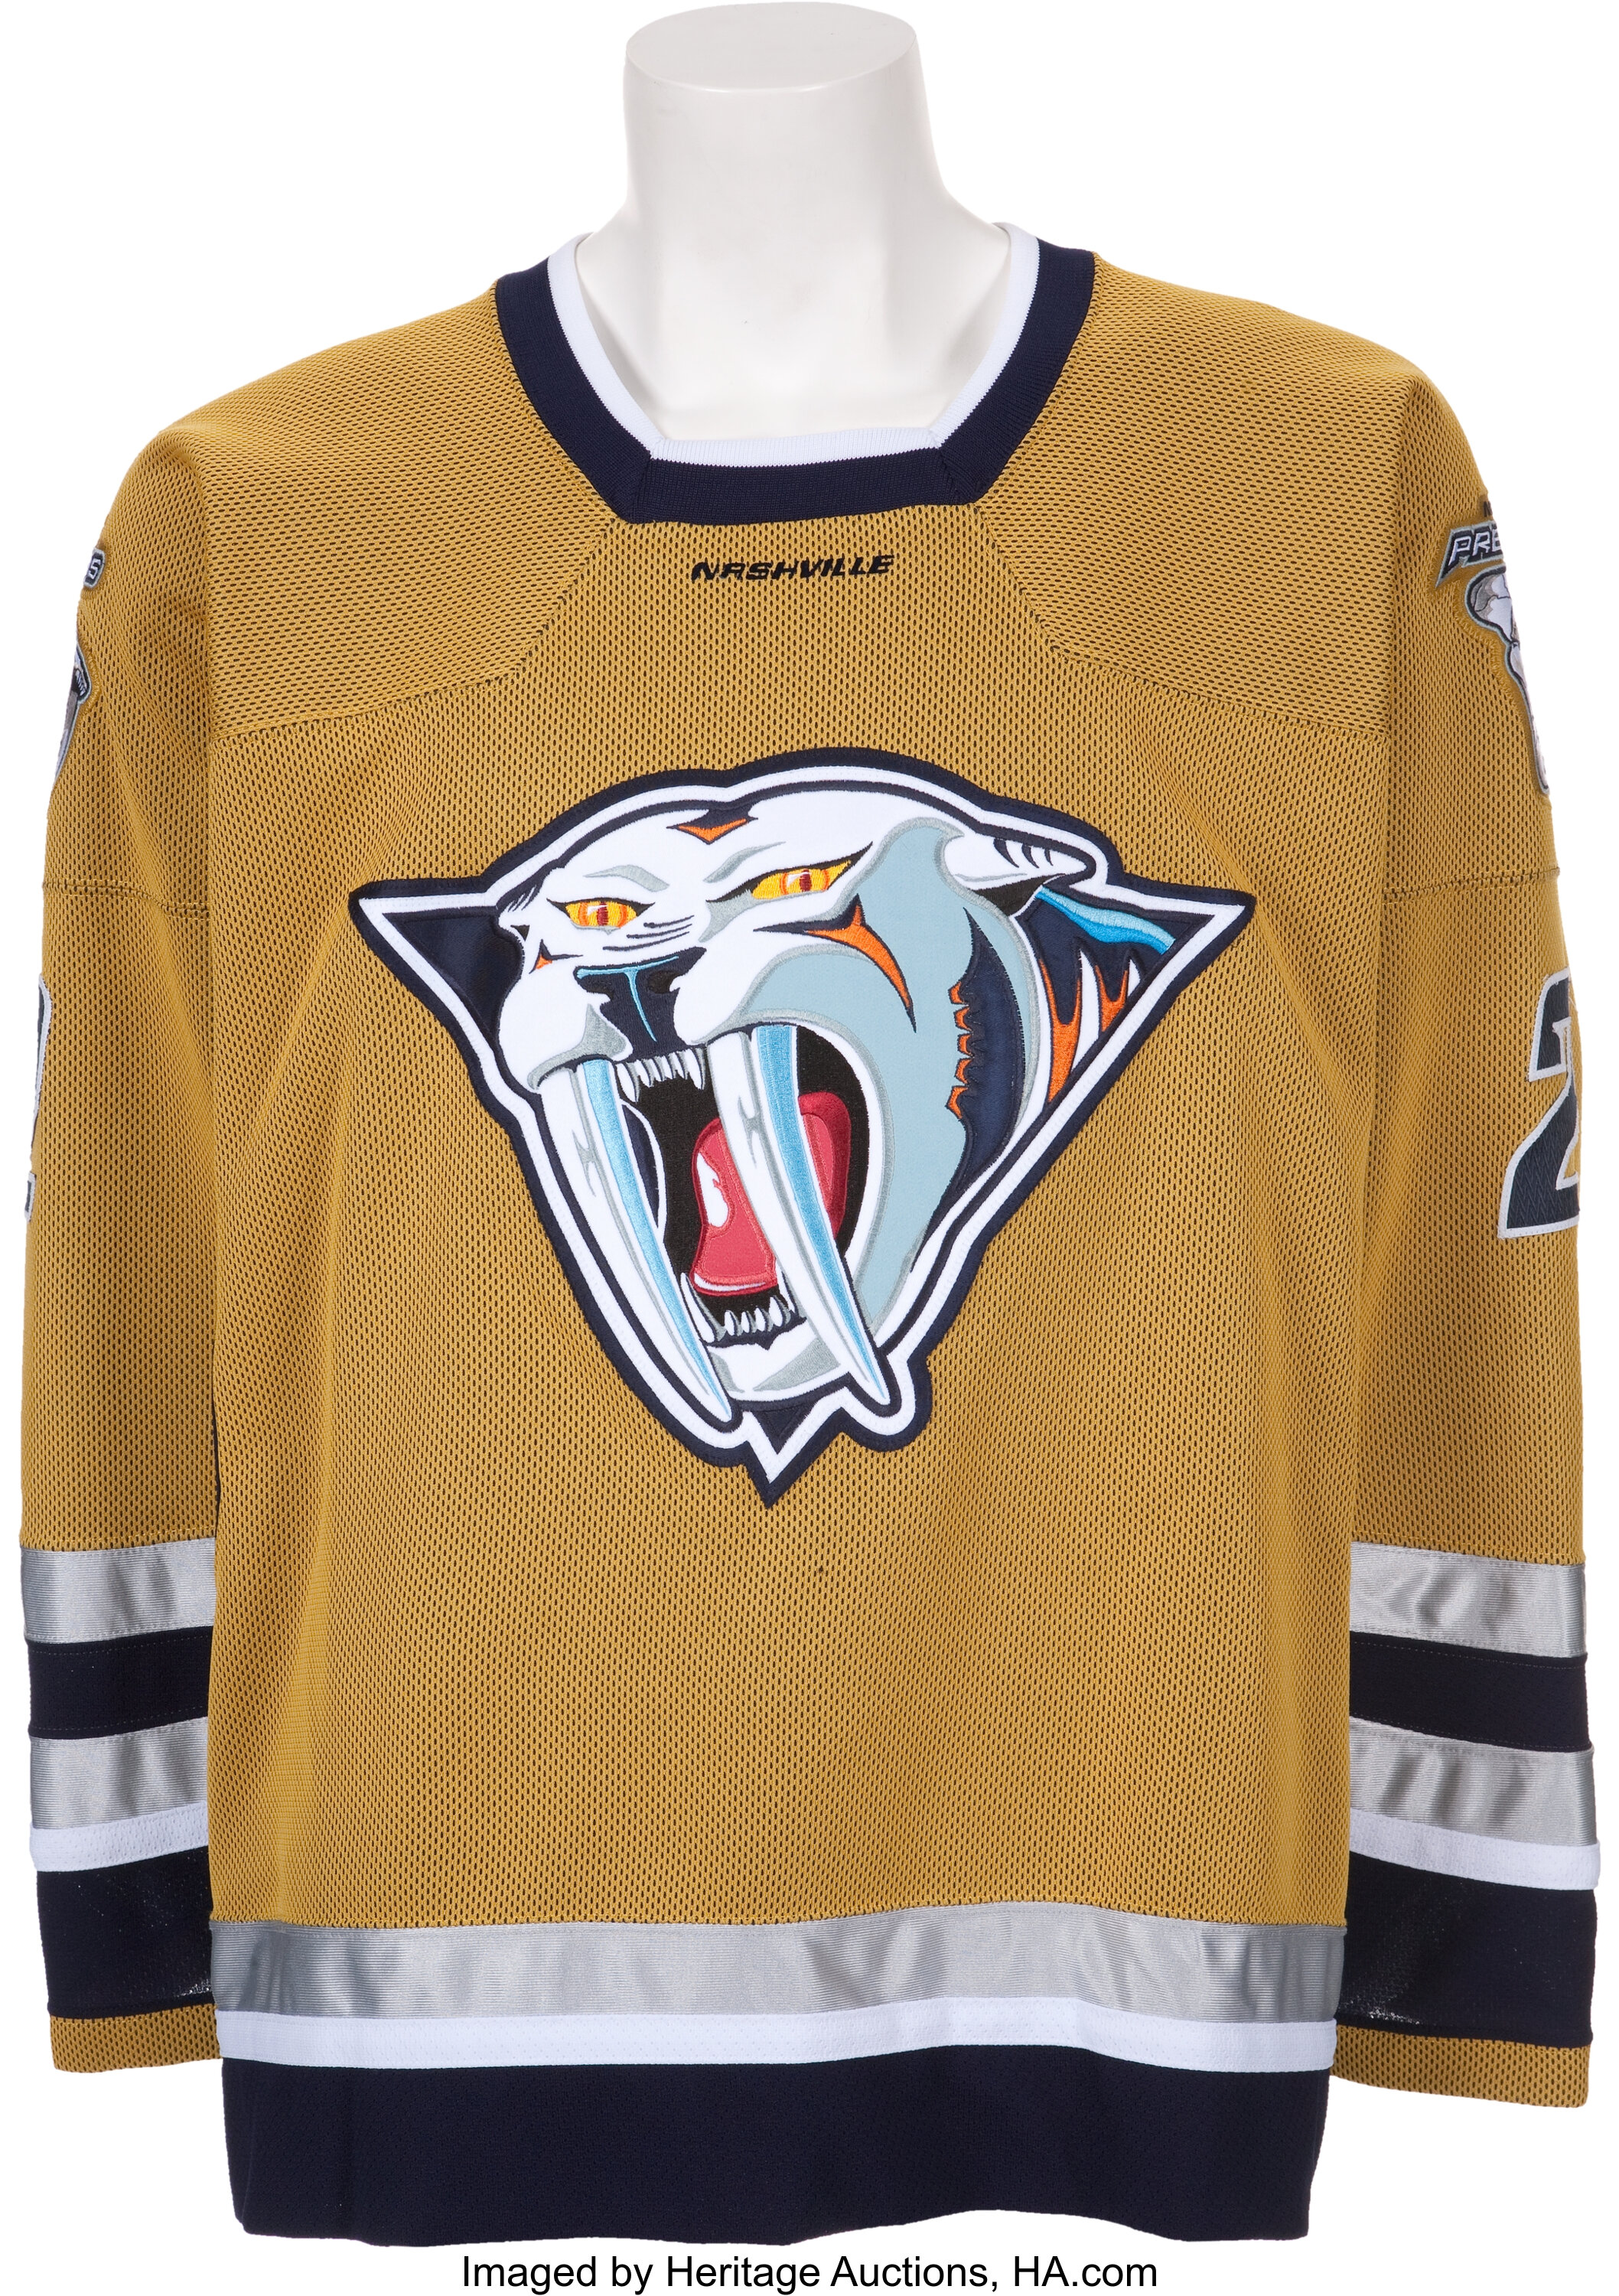 Nashville Predators on X: The #Preds are wearing these jersey